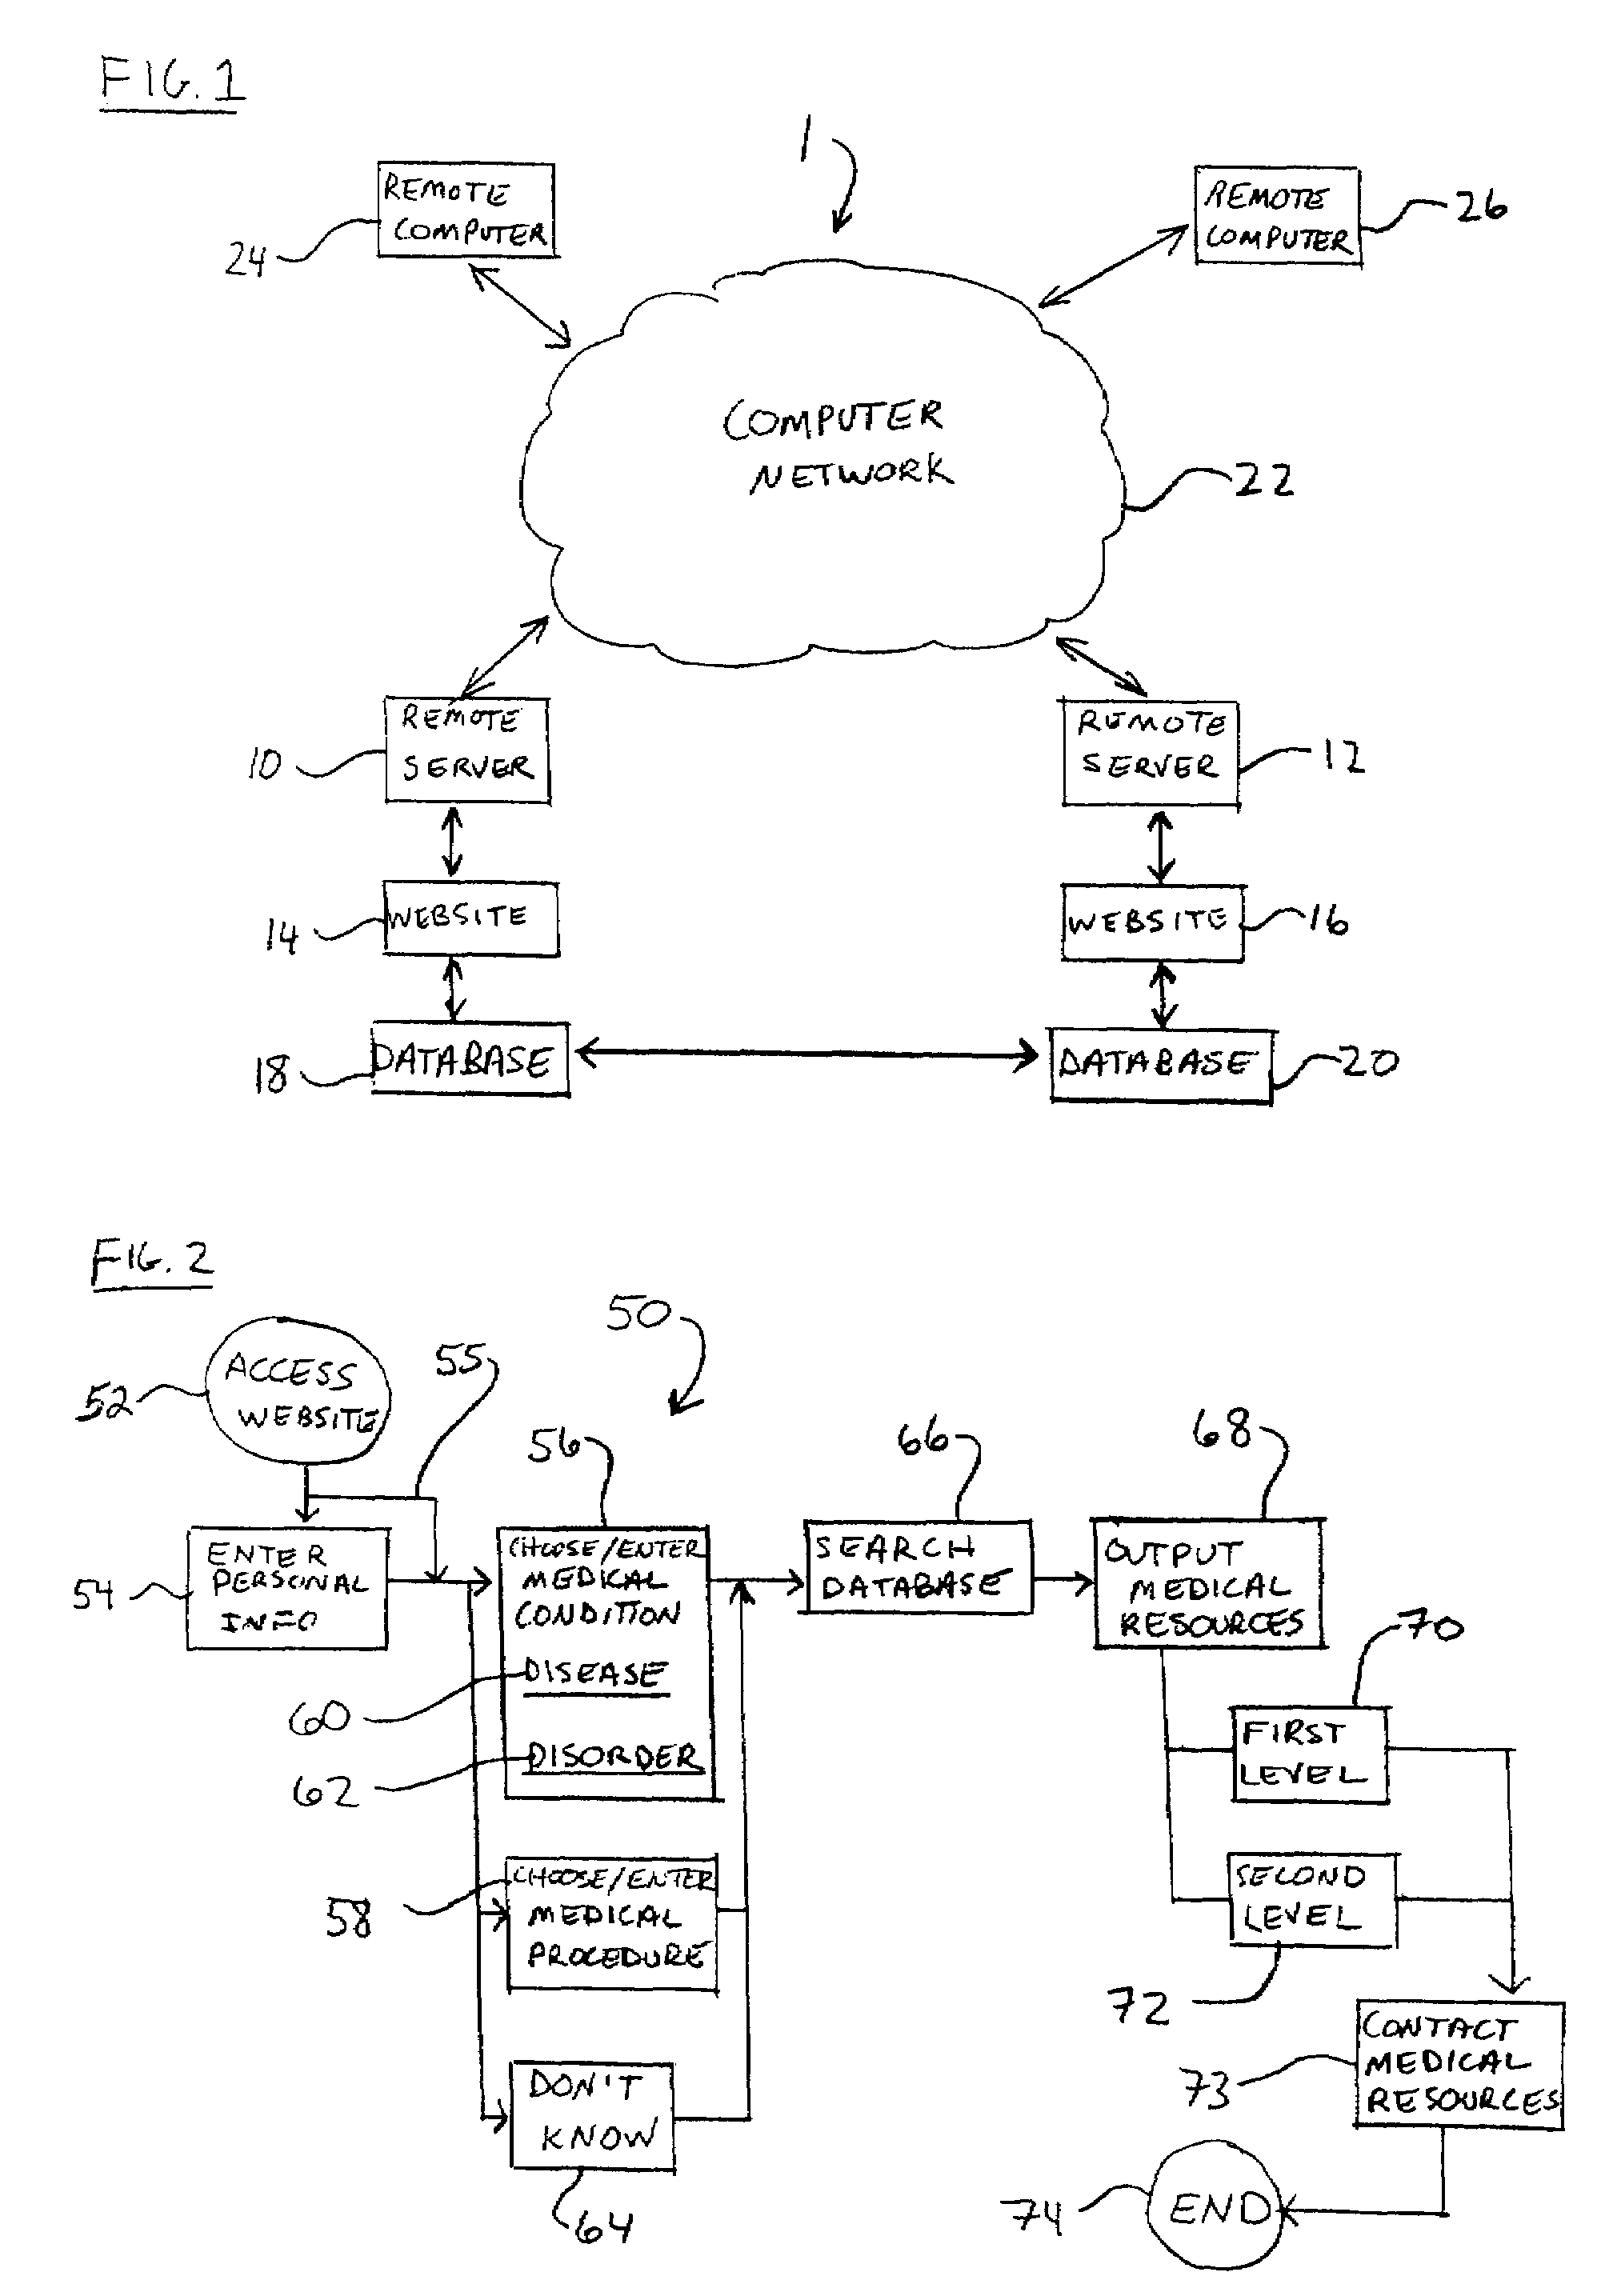 Method and system for matching medical condition information with a medical resource on a computer network